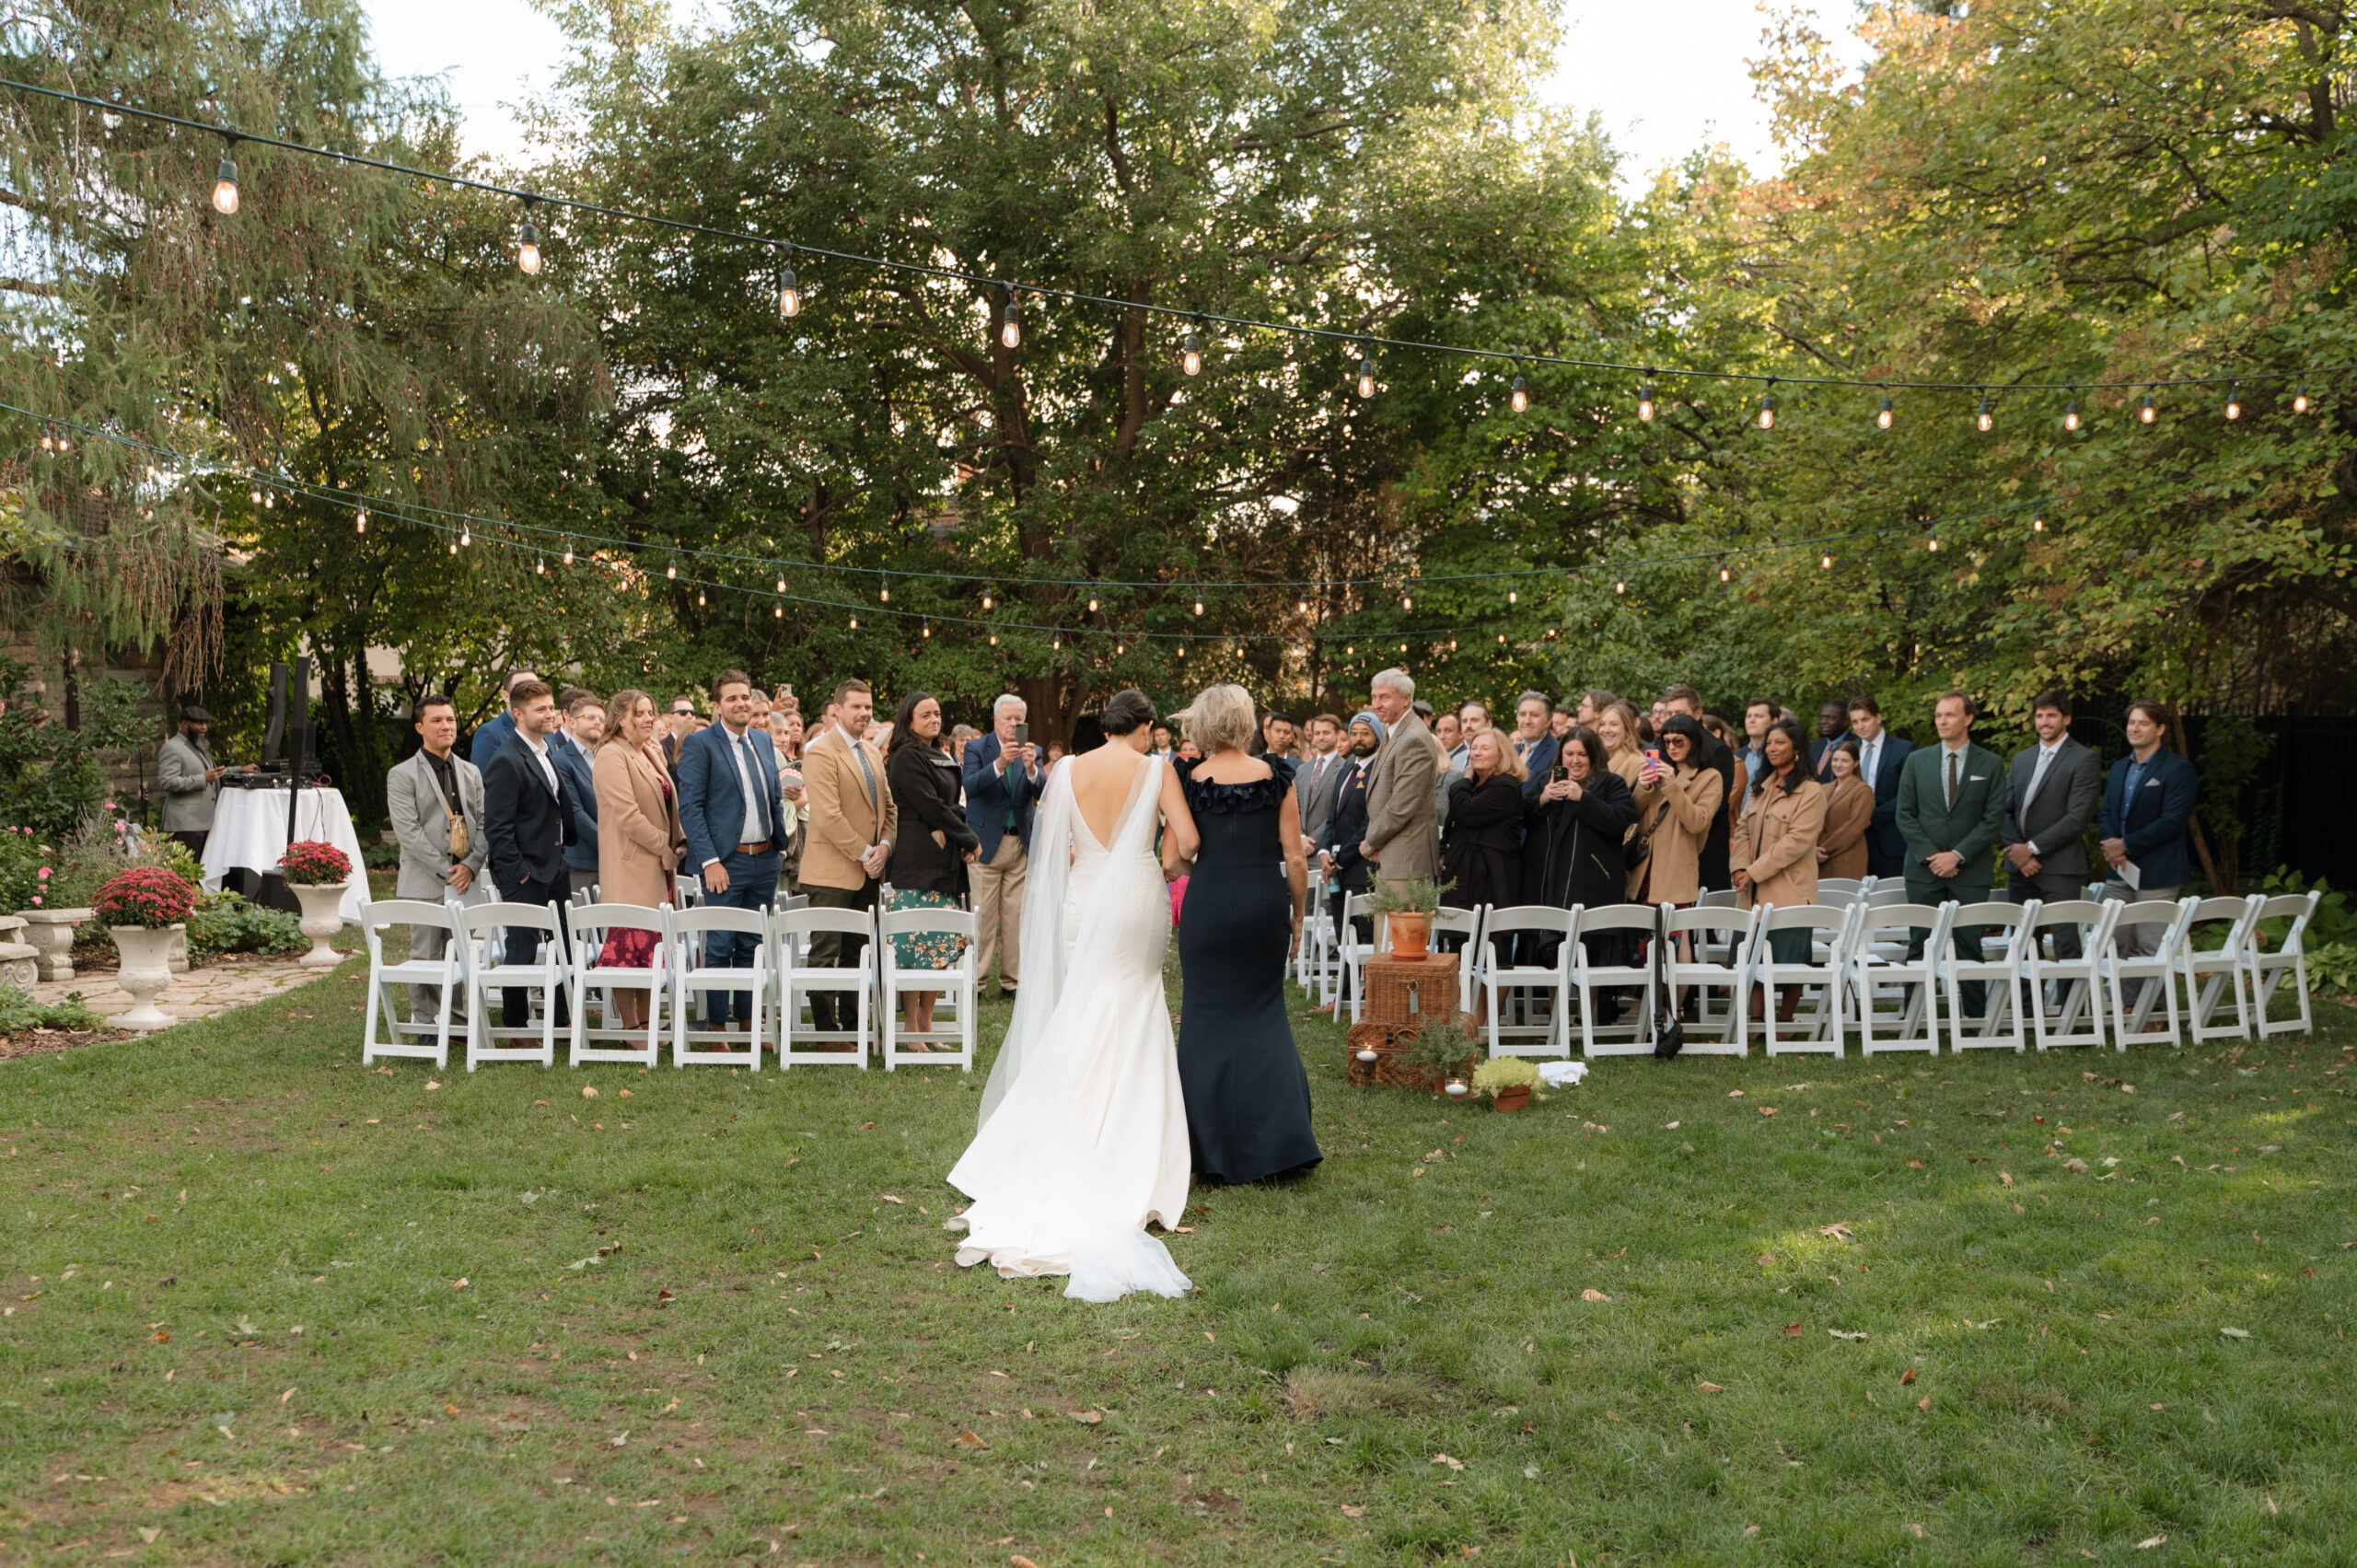 Walking down the aisle at outdoor ceremony - St. Paul College Club